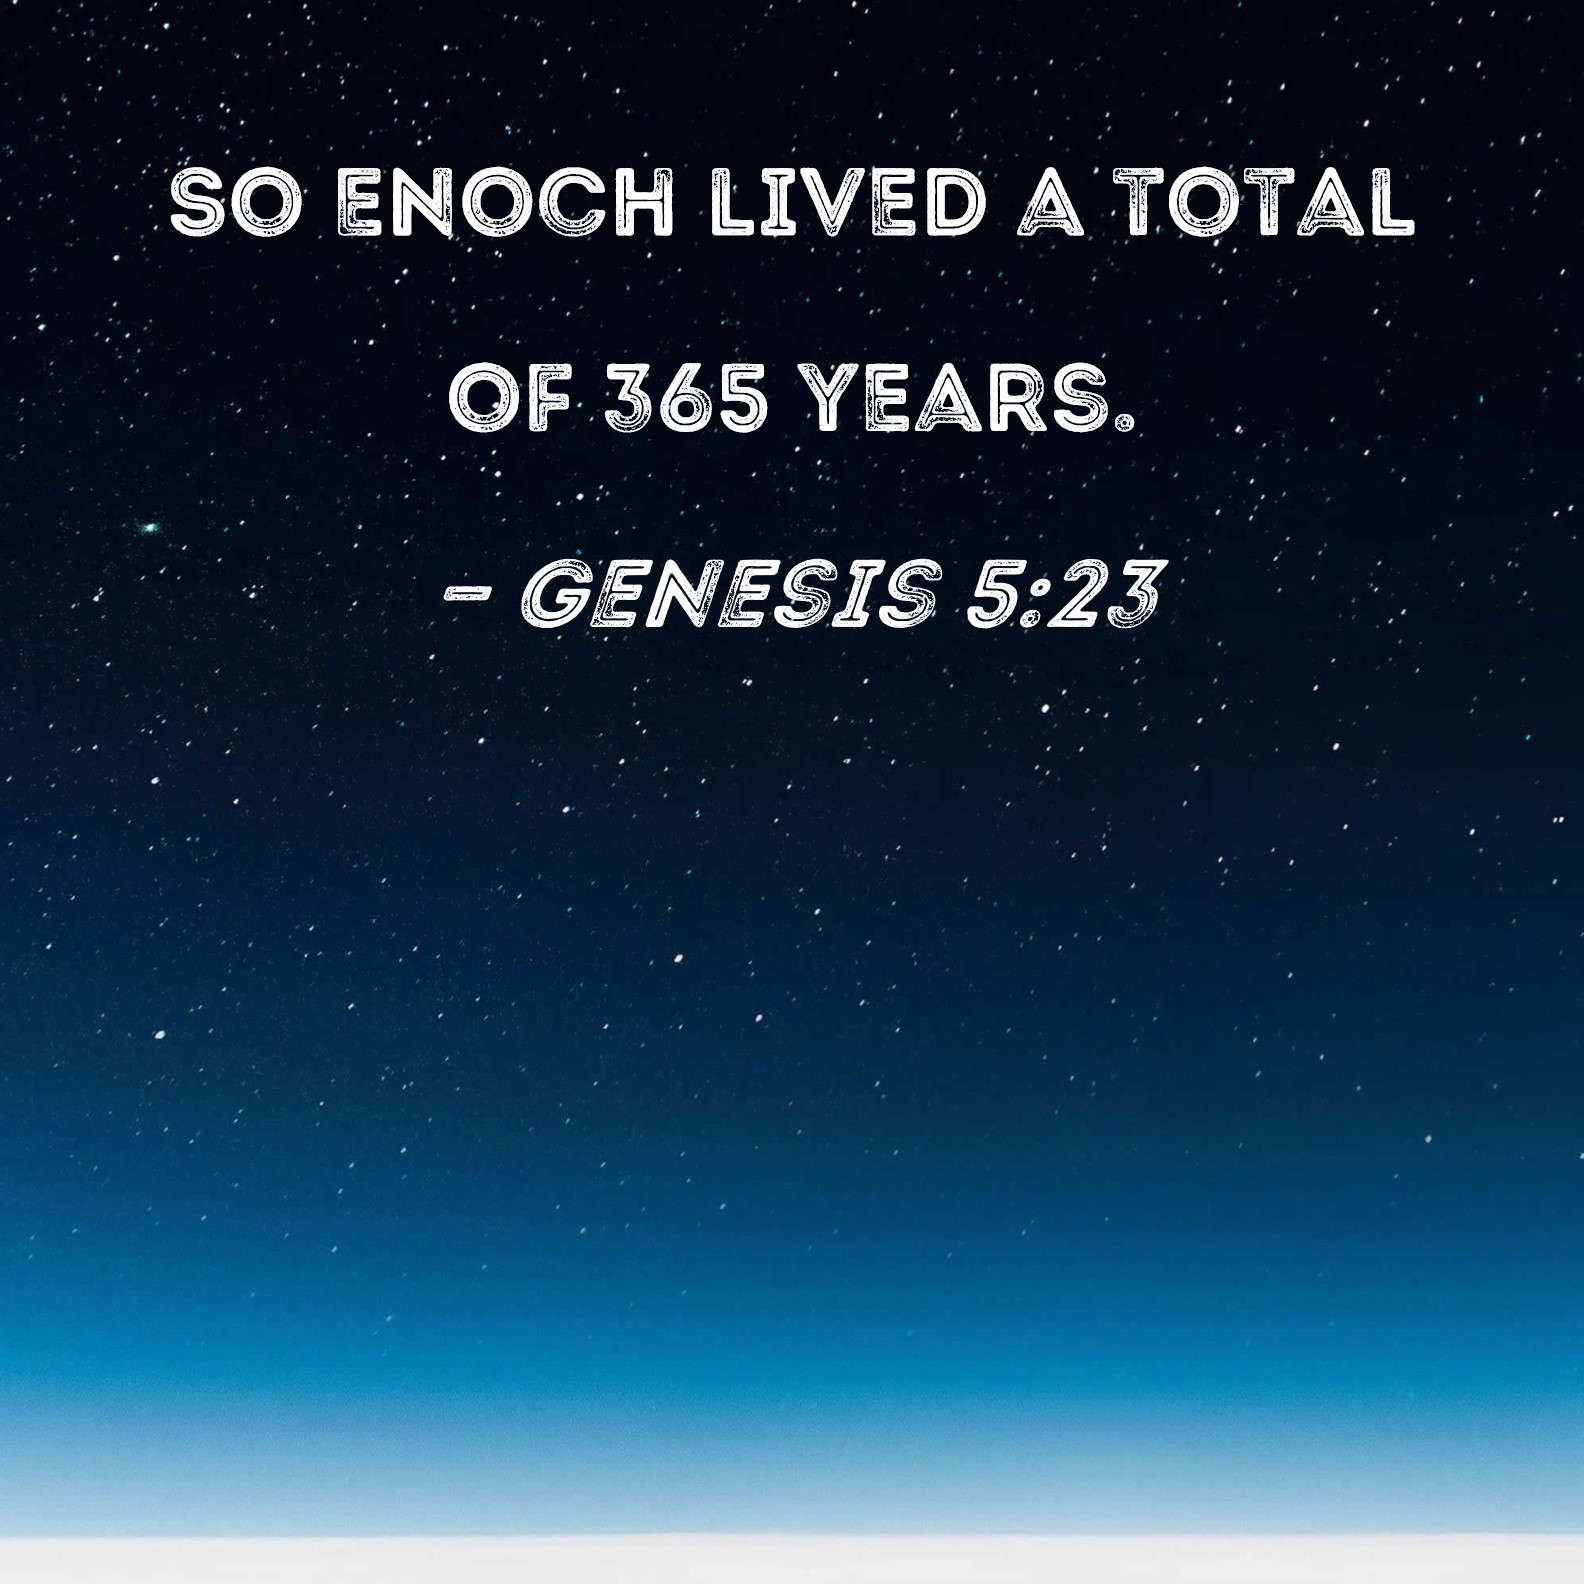 Who lived 365 years in Bible?